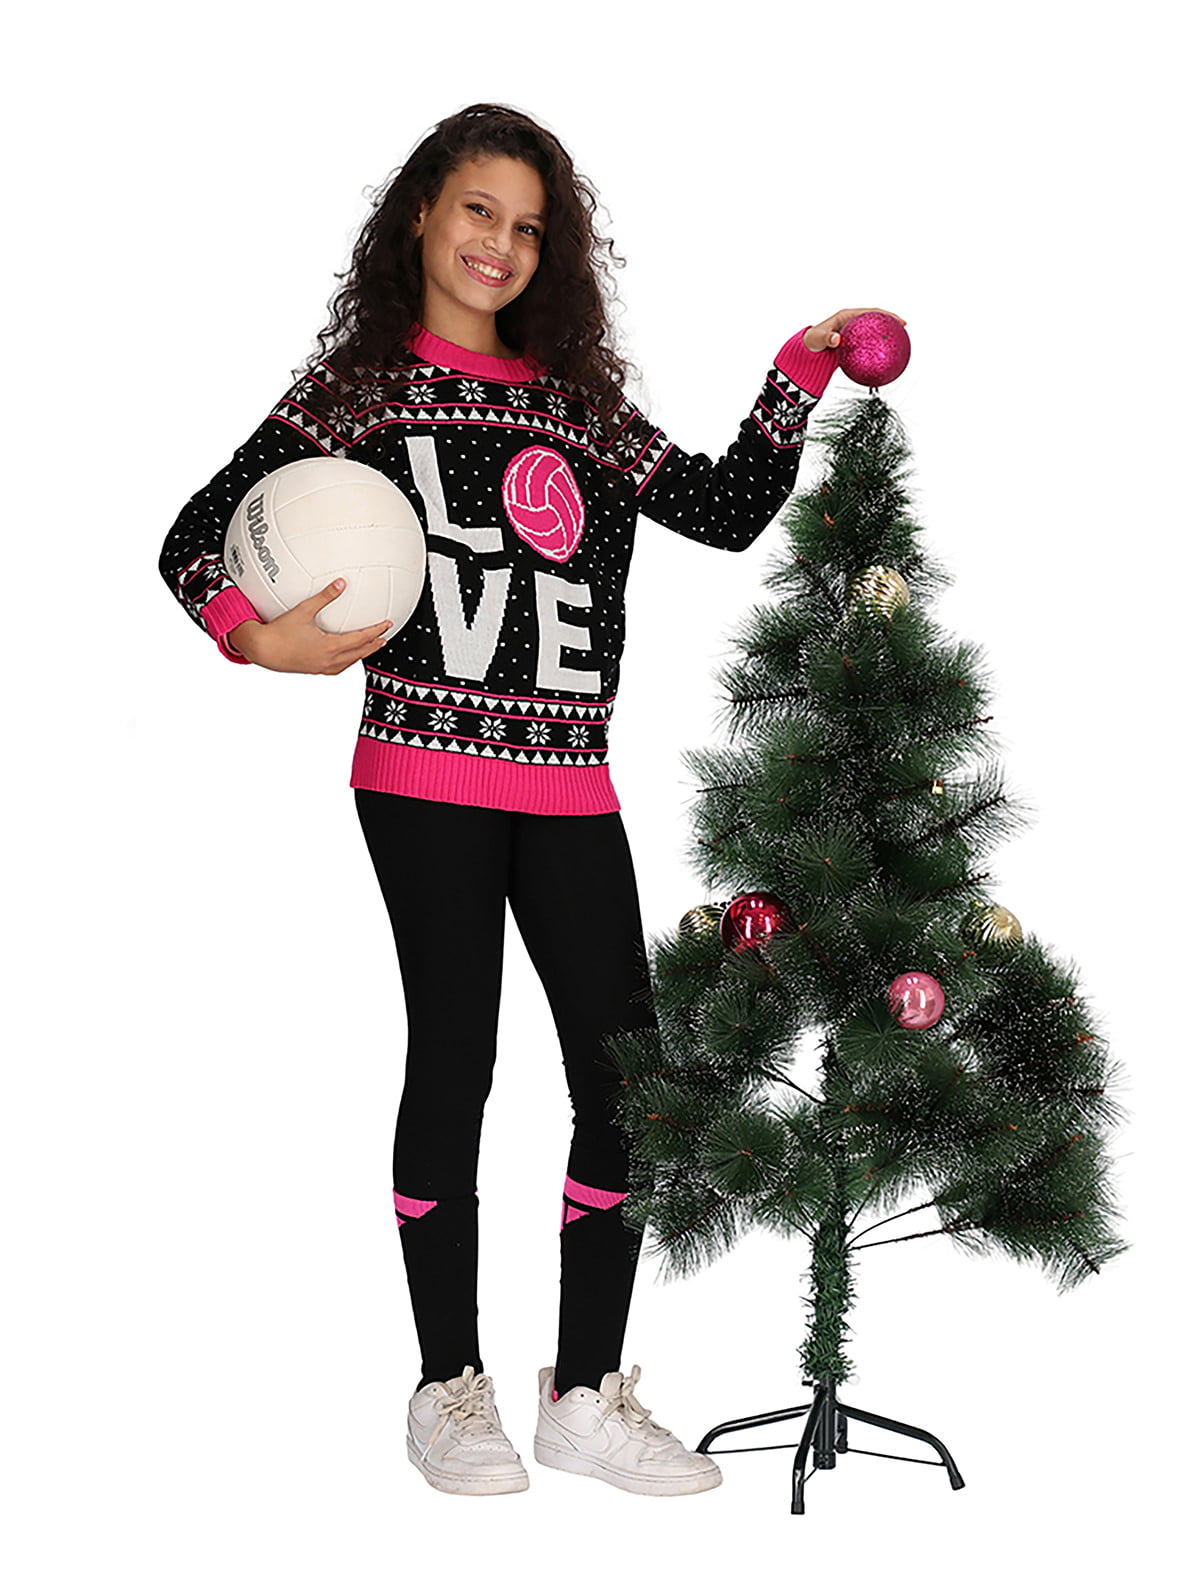 Tstars Love Volleyball Ugly Christmas Sweater for Volleyball Fans Teen Girls Sweater